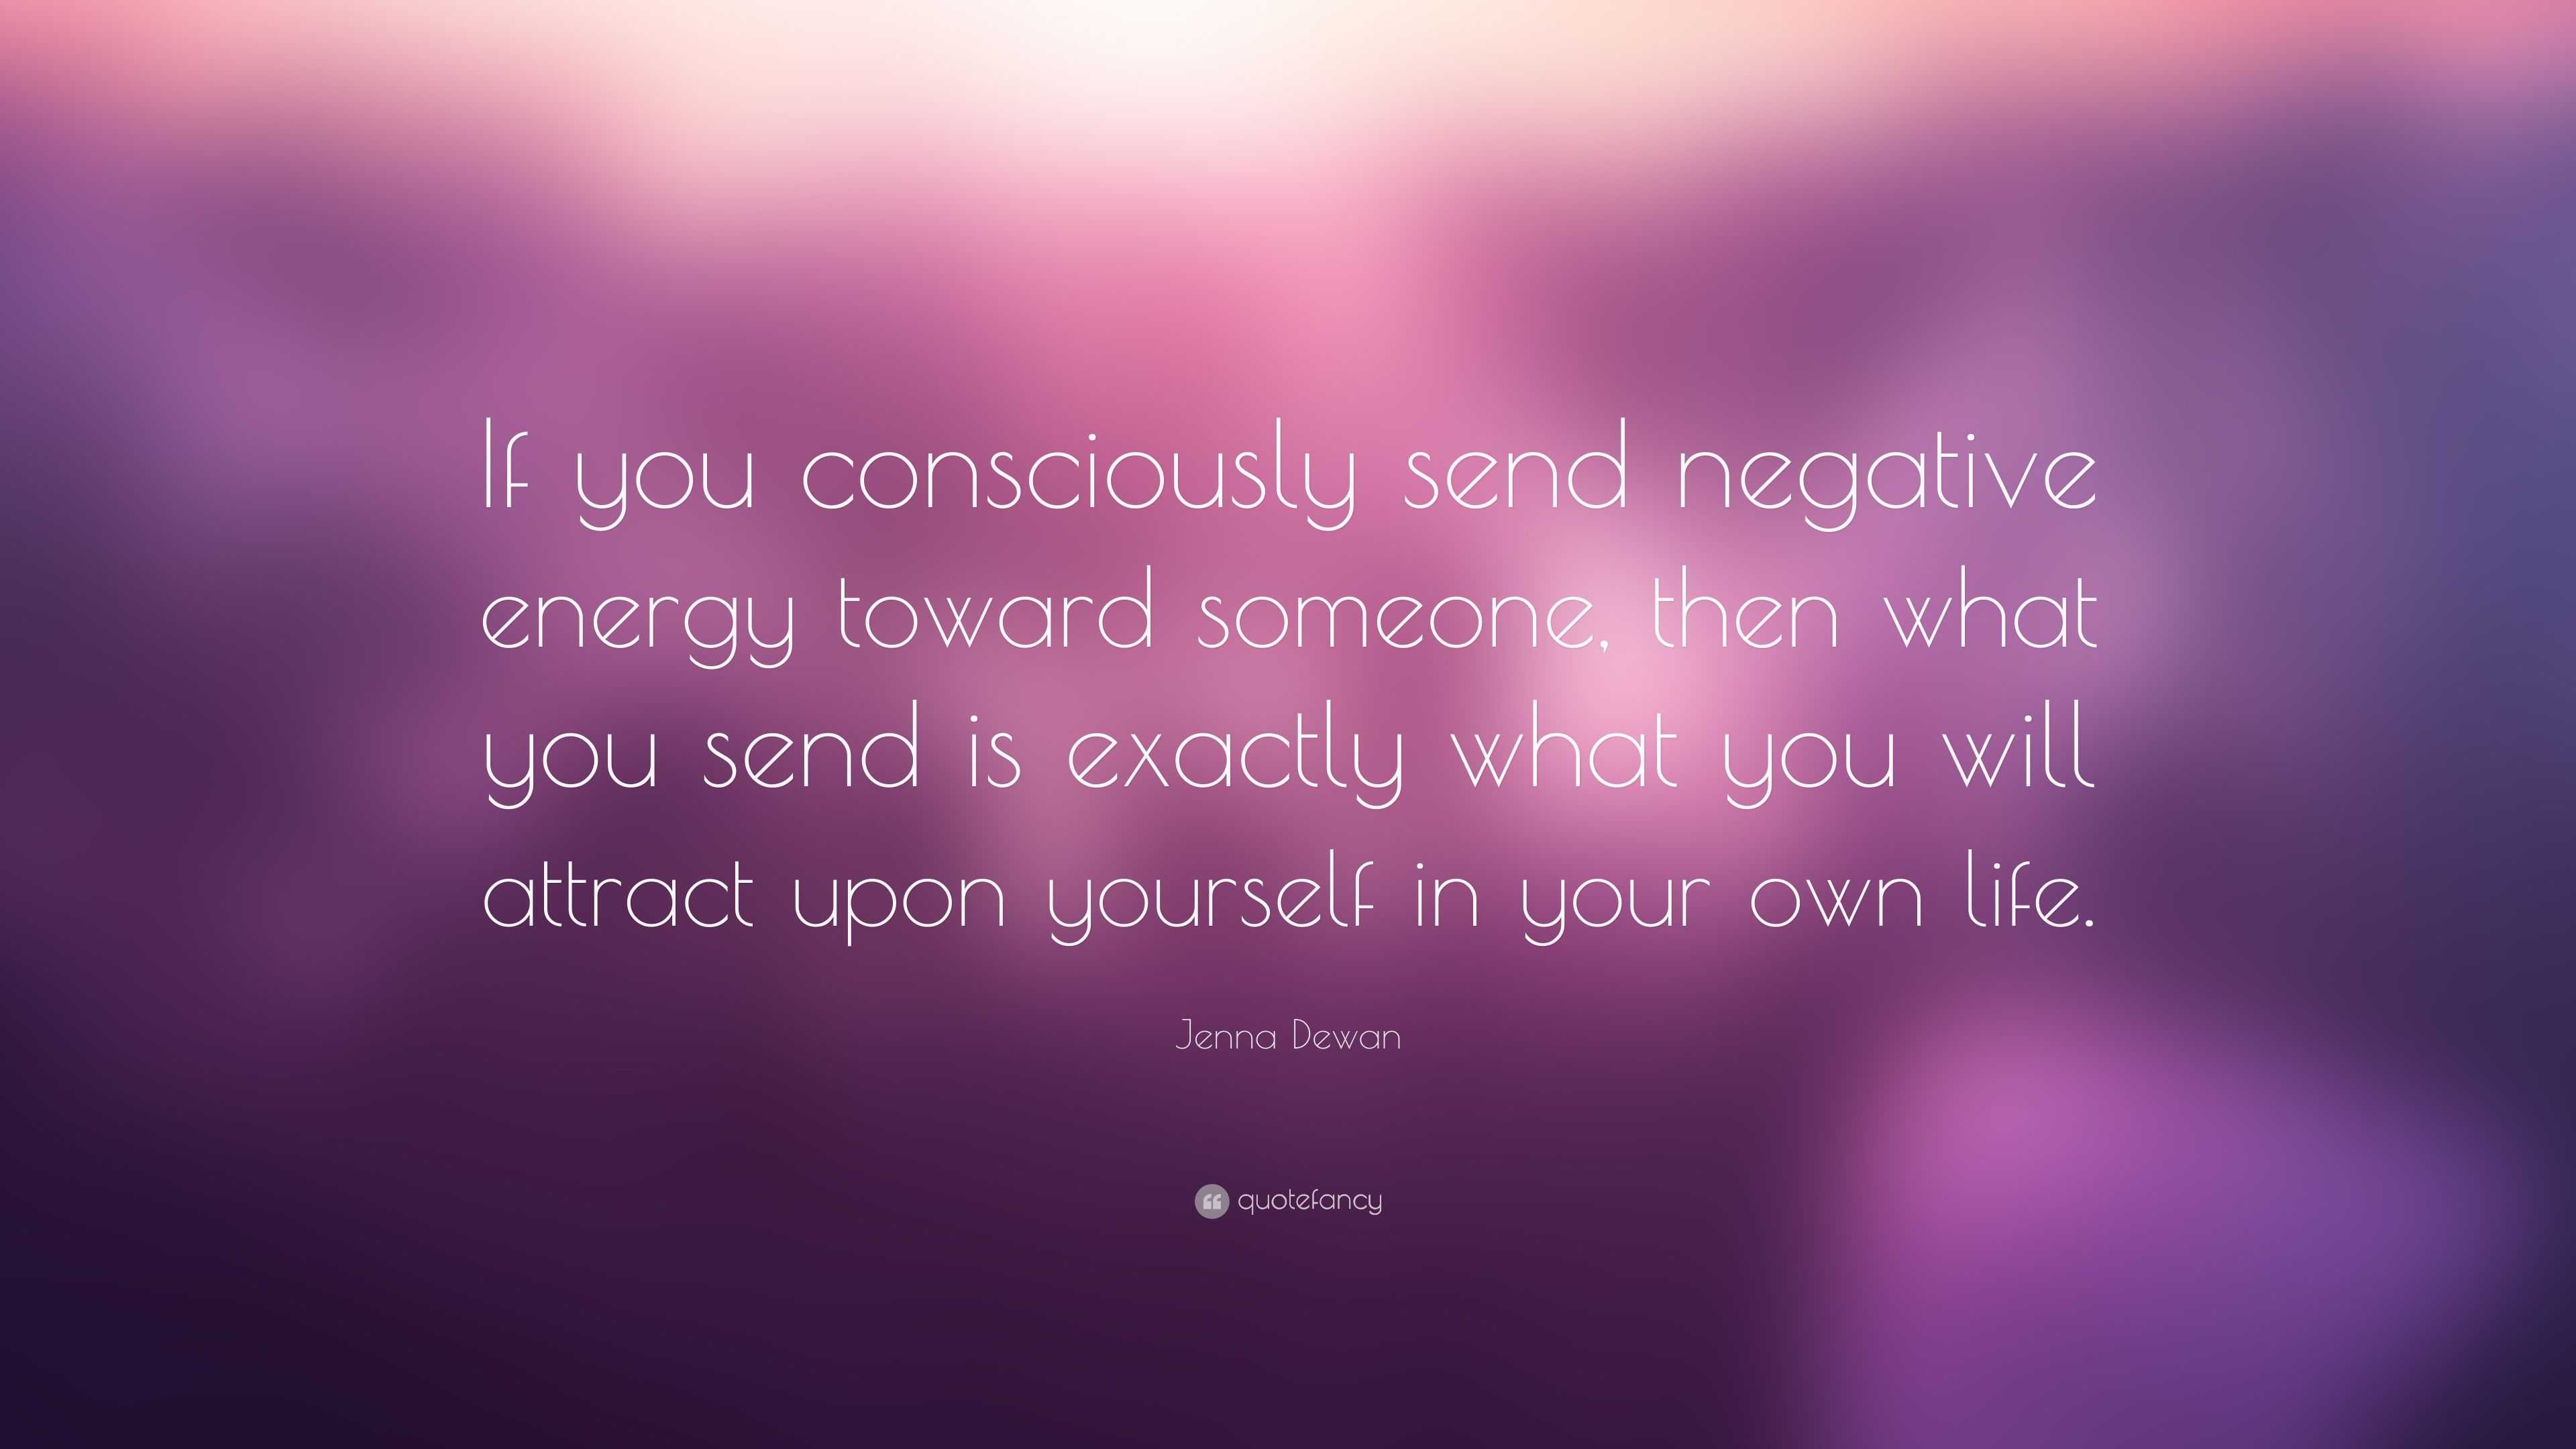 Jenna Dewan Quote: “If you consciously send negative energy toward